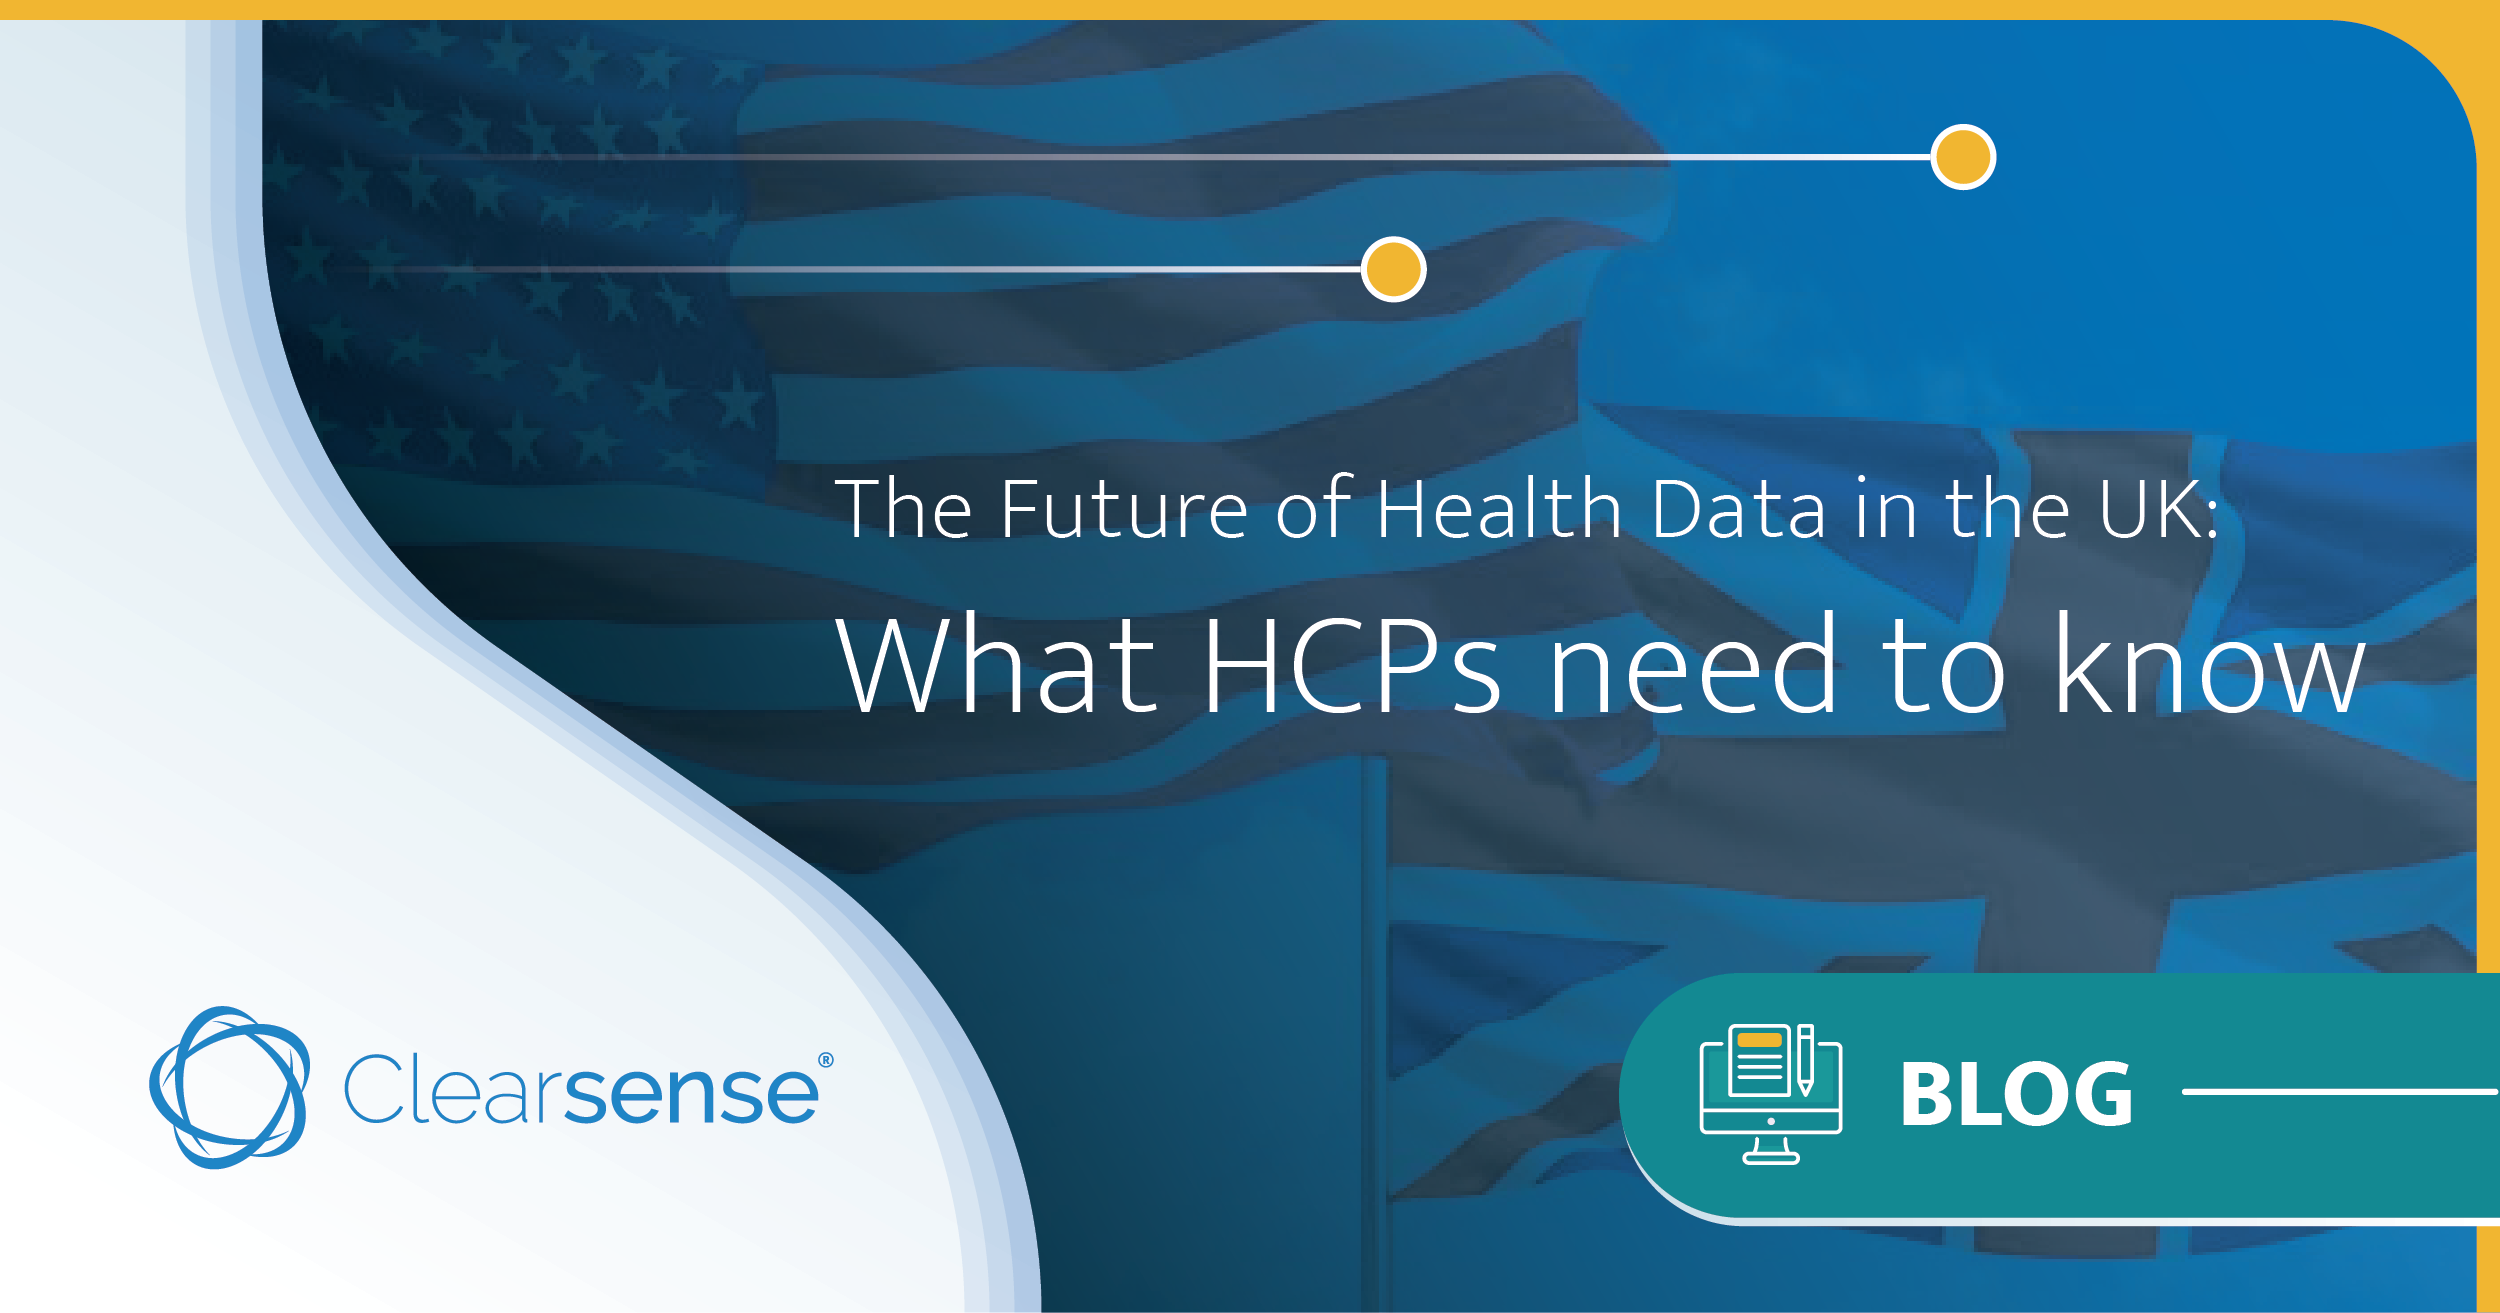 The Future of Health Data in the UK: What HCPs need to know